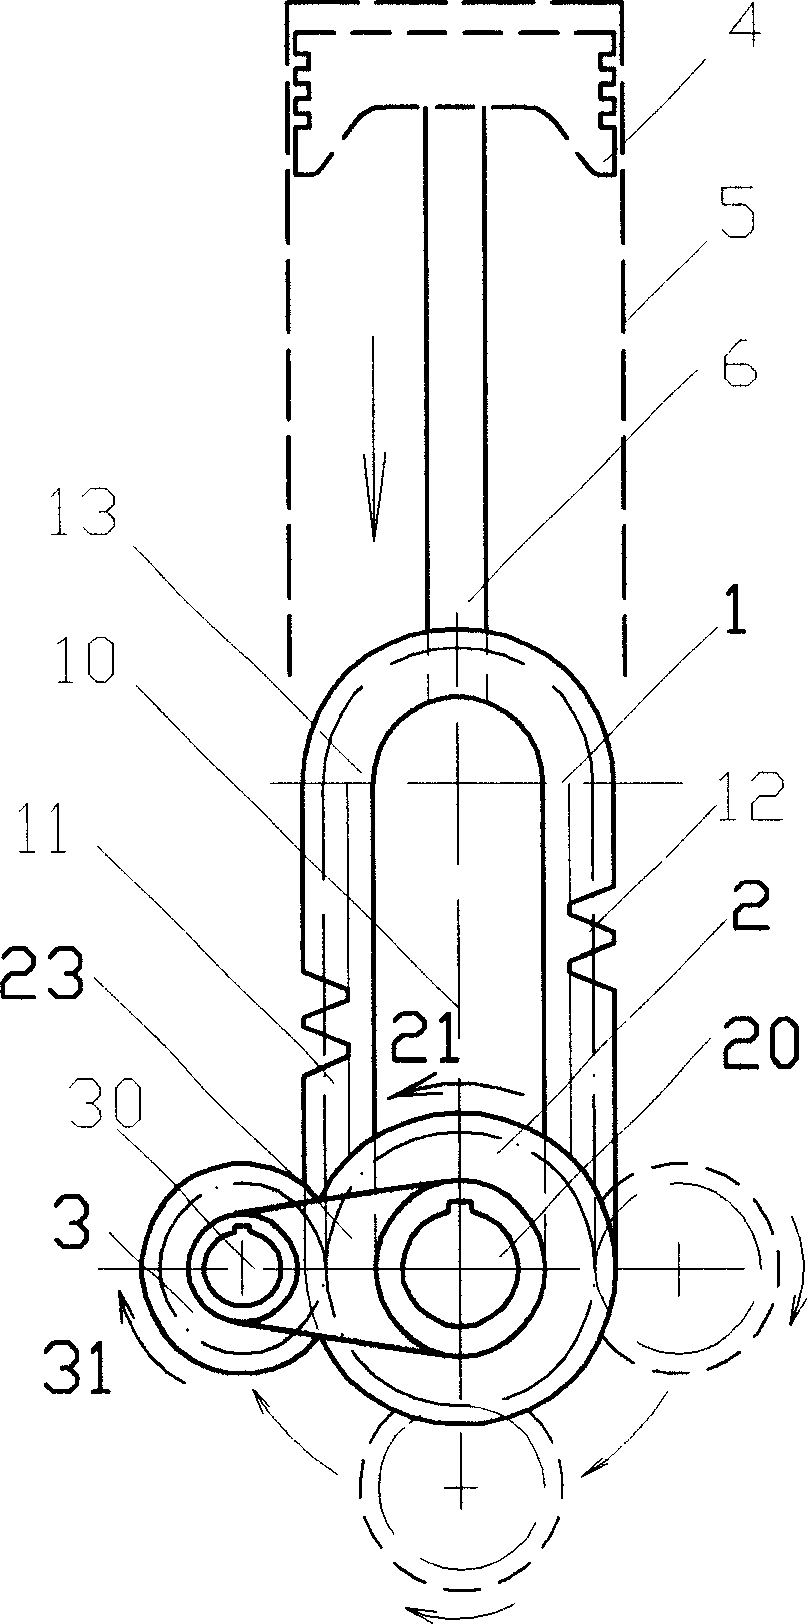 Reciprocating-rotating power converting mechanism without crank, and its engine and compressor